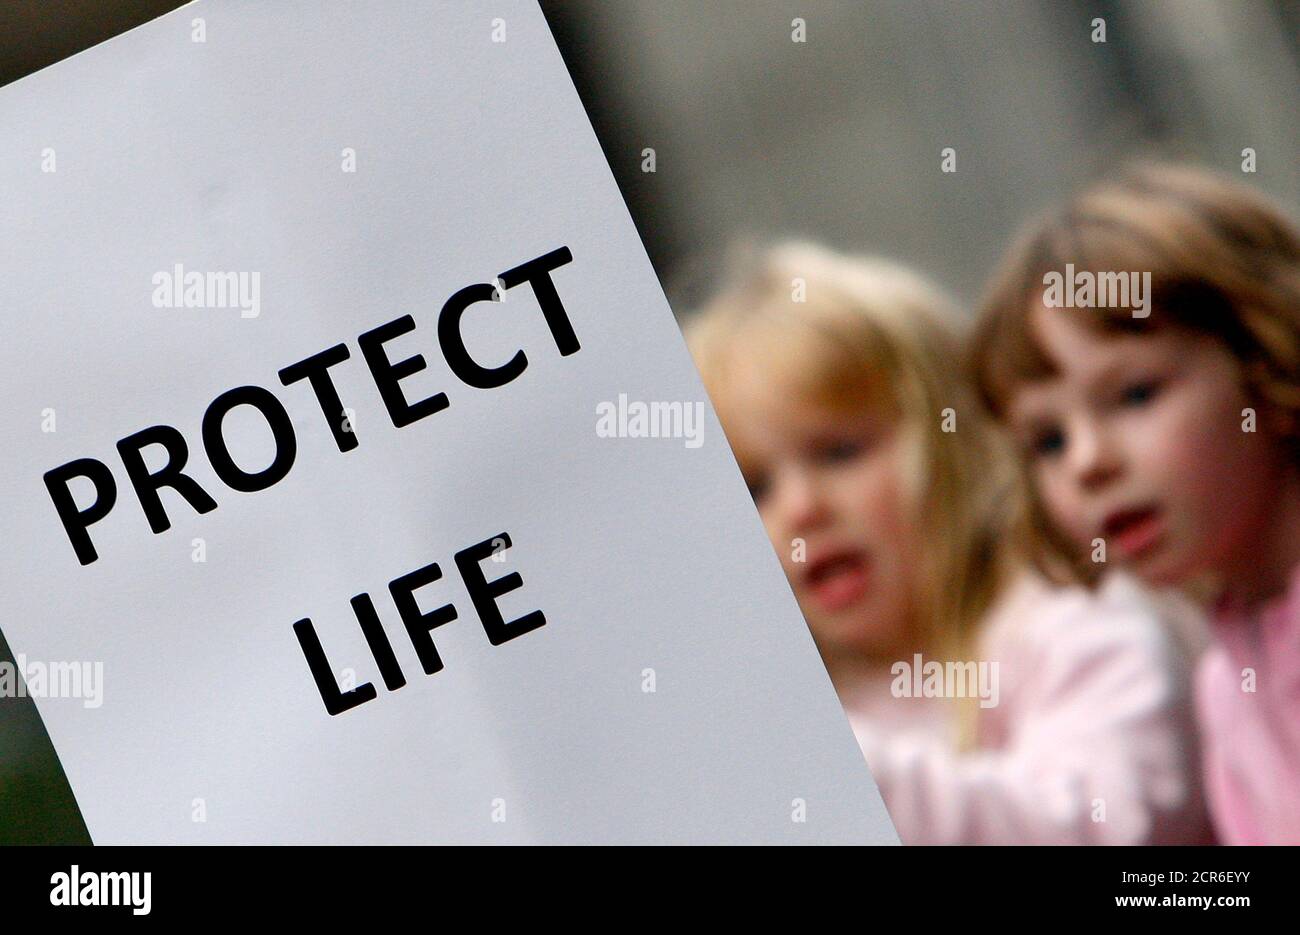 Children march during an anti-abortion demonstration in central London October 27, 2007. The 1967 Abortion Act, which marks its 40th anniversary on Saturday, allows terminations to be carried out up to 24 weeks after conception. However anti-abortion campaigners argue that medical advances mean that babies have a better chance of survival at 24 weeks than in the past, and say the upper limit should now be reduced.       REUTERS/Toby Melville (BRITAIN) Stock Photo